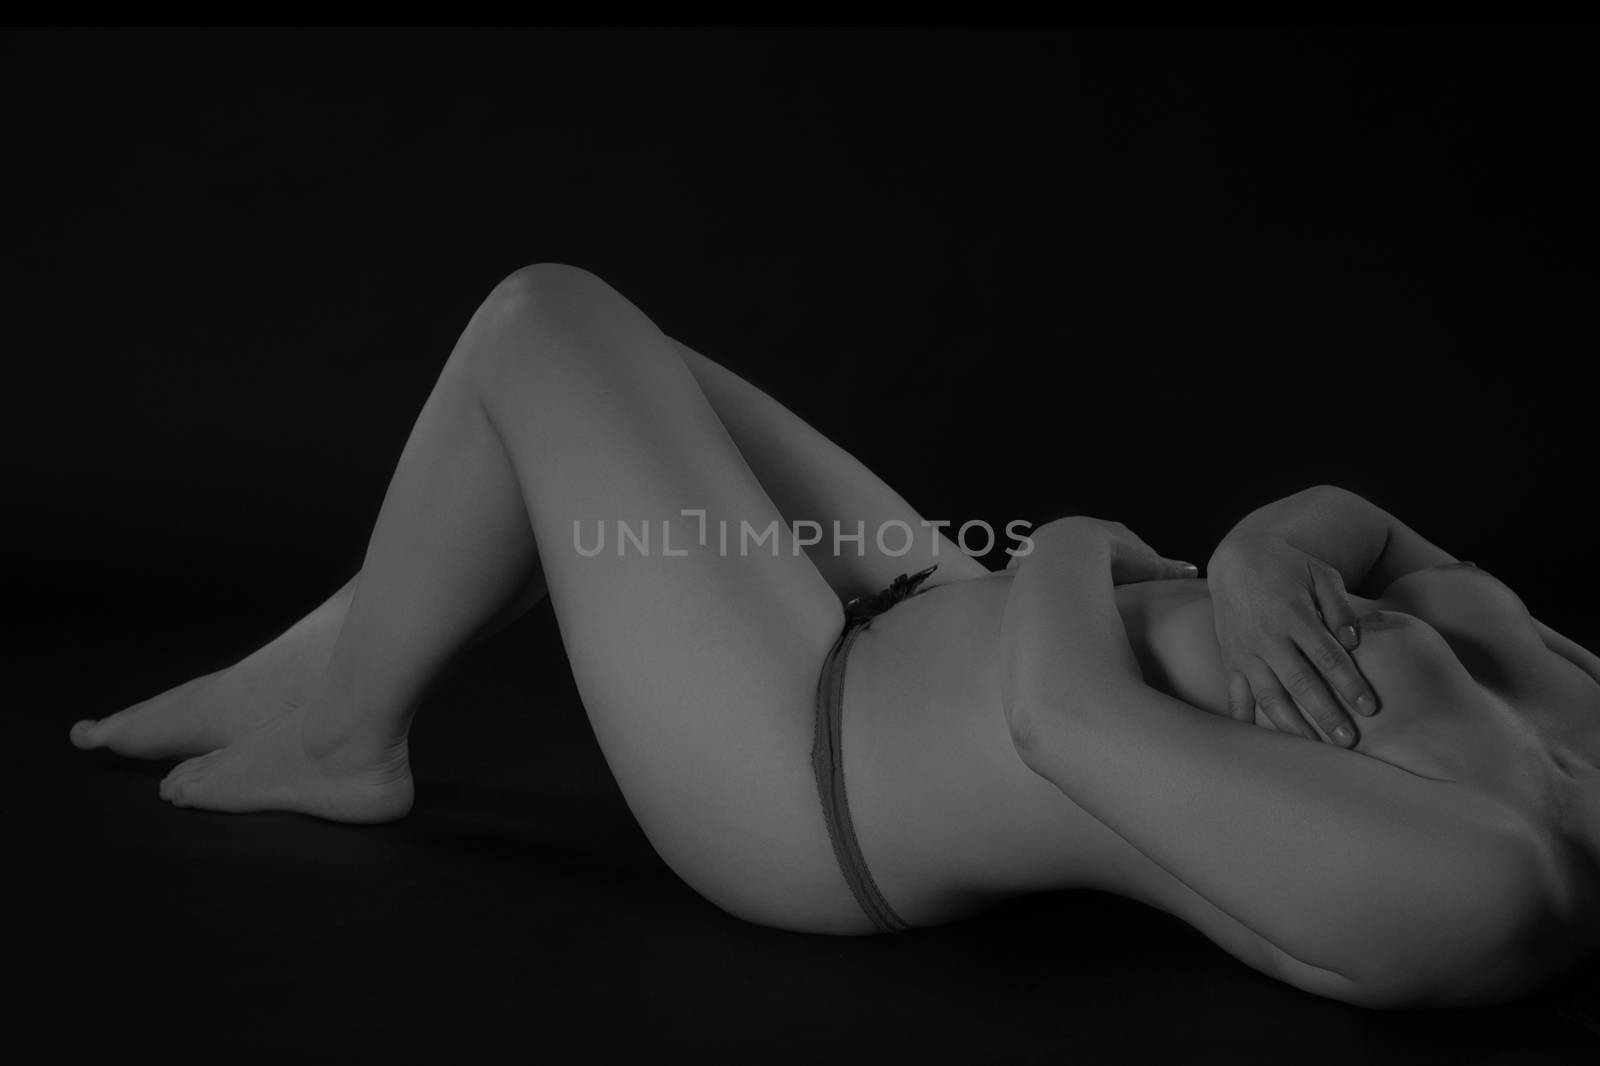 A sensual shot of a woman in underwear by 25ehaag6